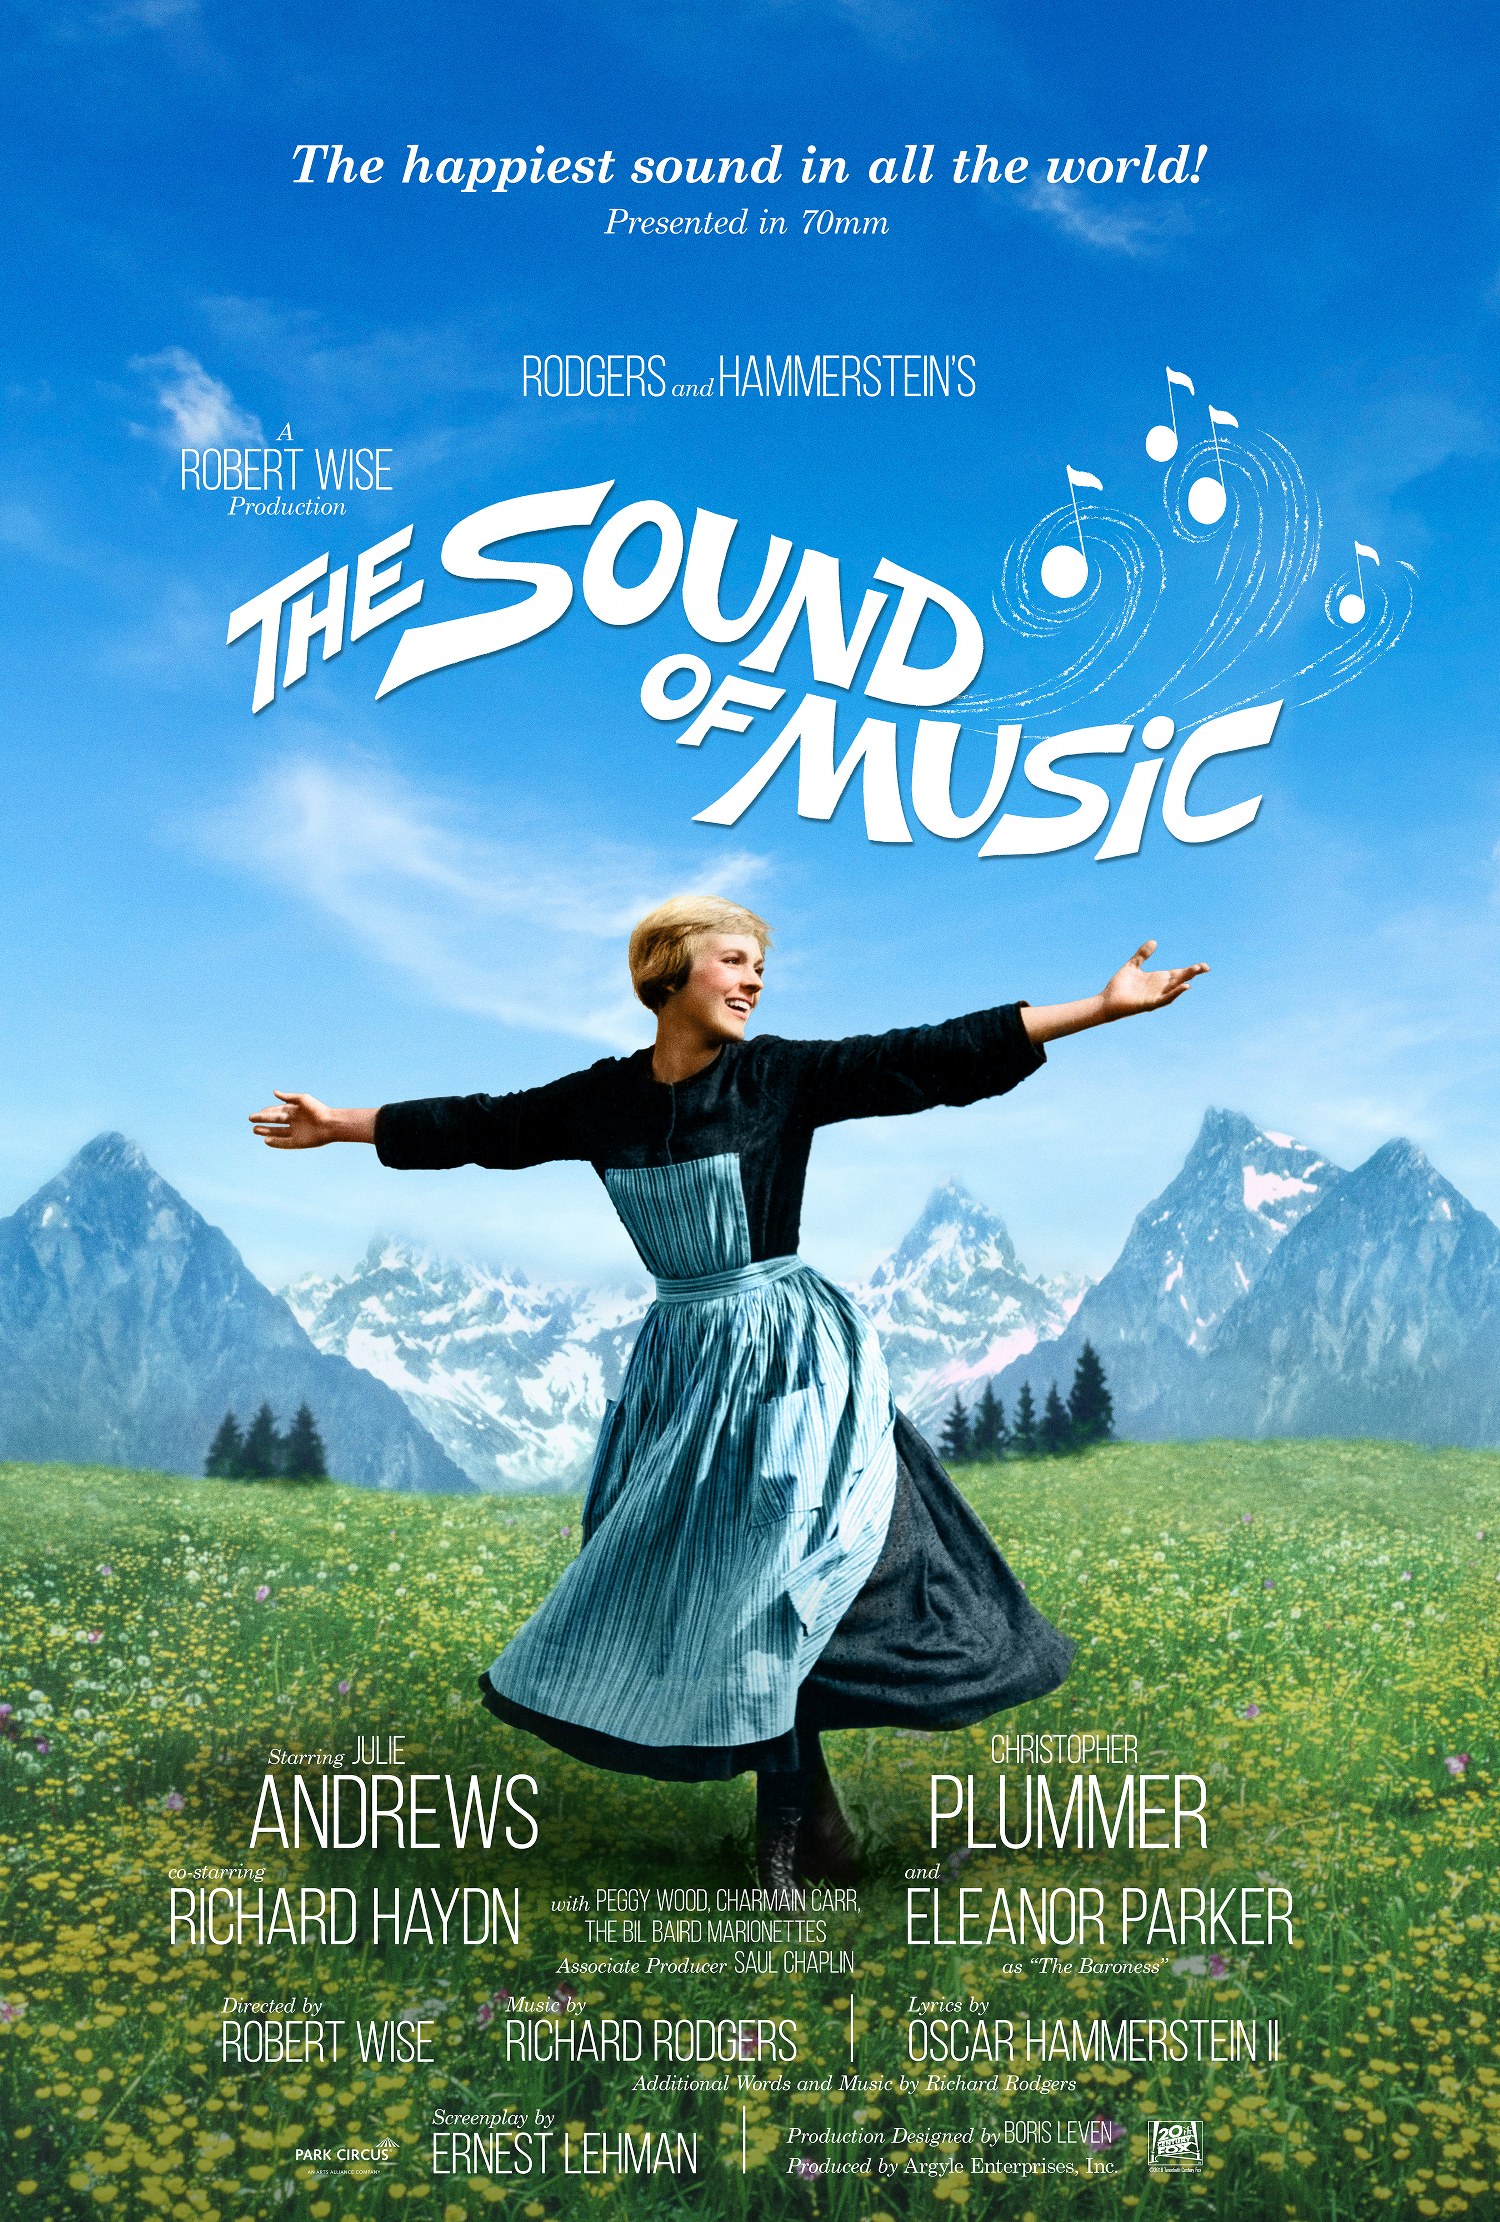 SOUND-OF-MUSIC-1-sheet_70mm_emailable | Confusions and Connections